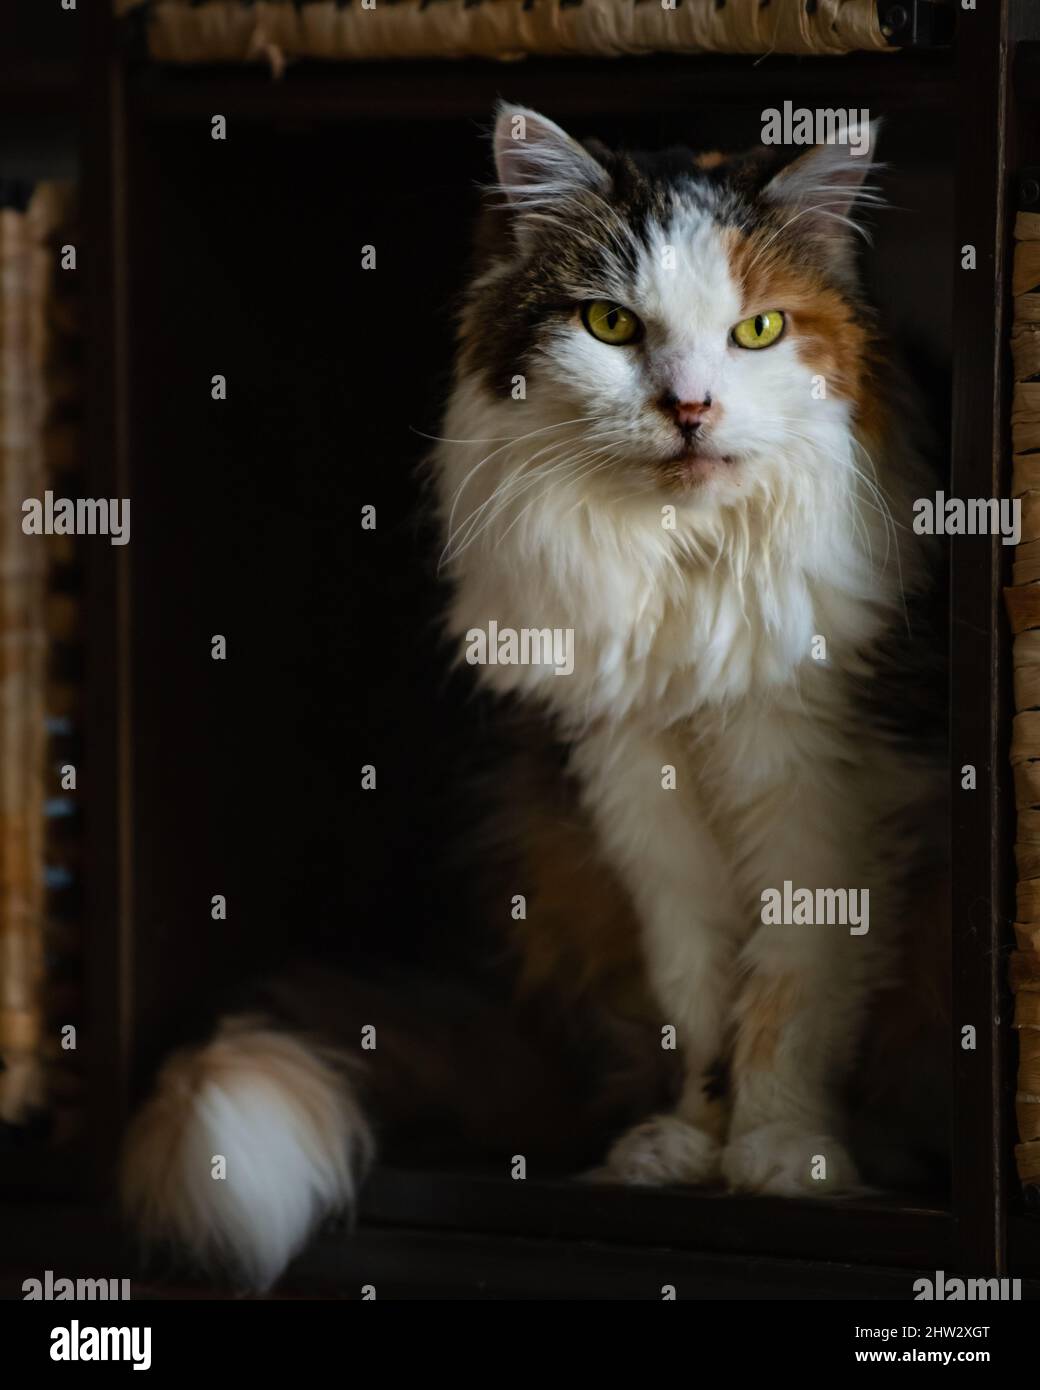 An old angry and fluffy calico cat glares while sitting in a cubby box Stock Photo